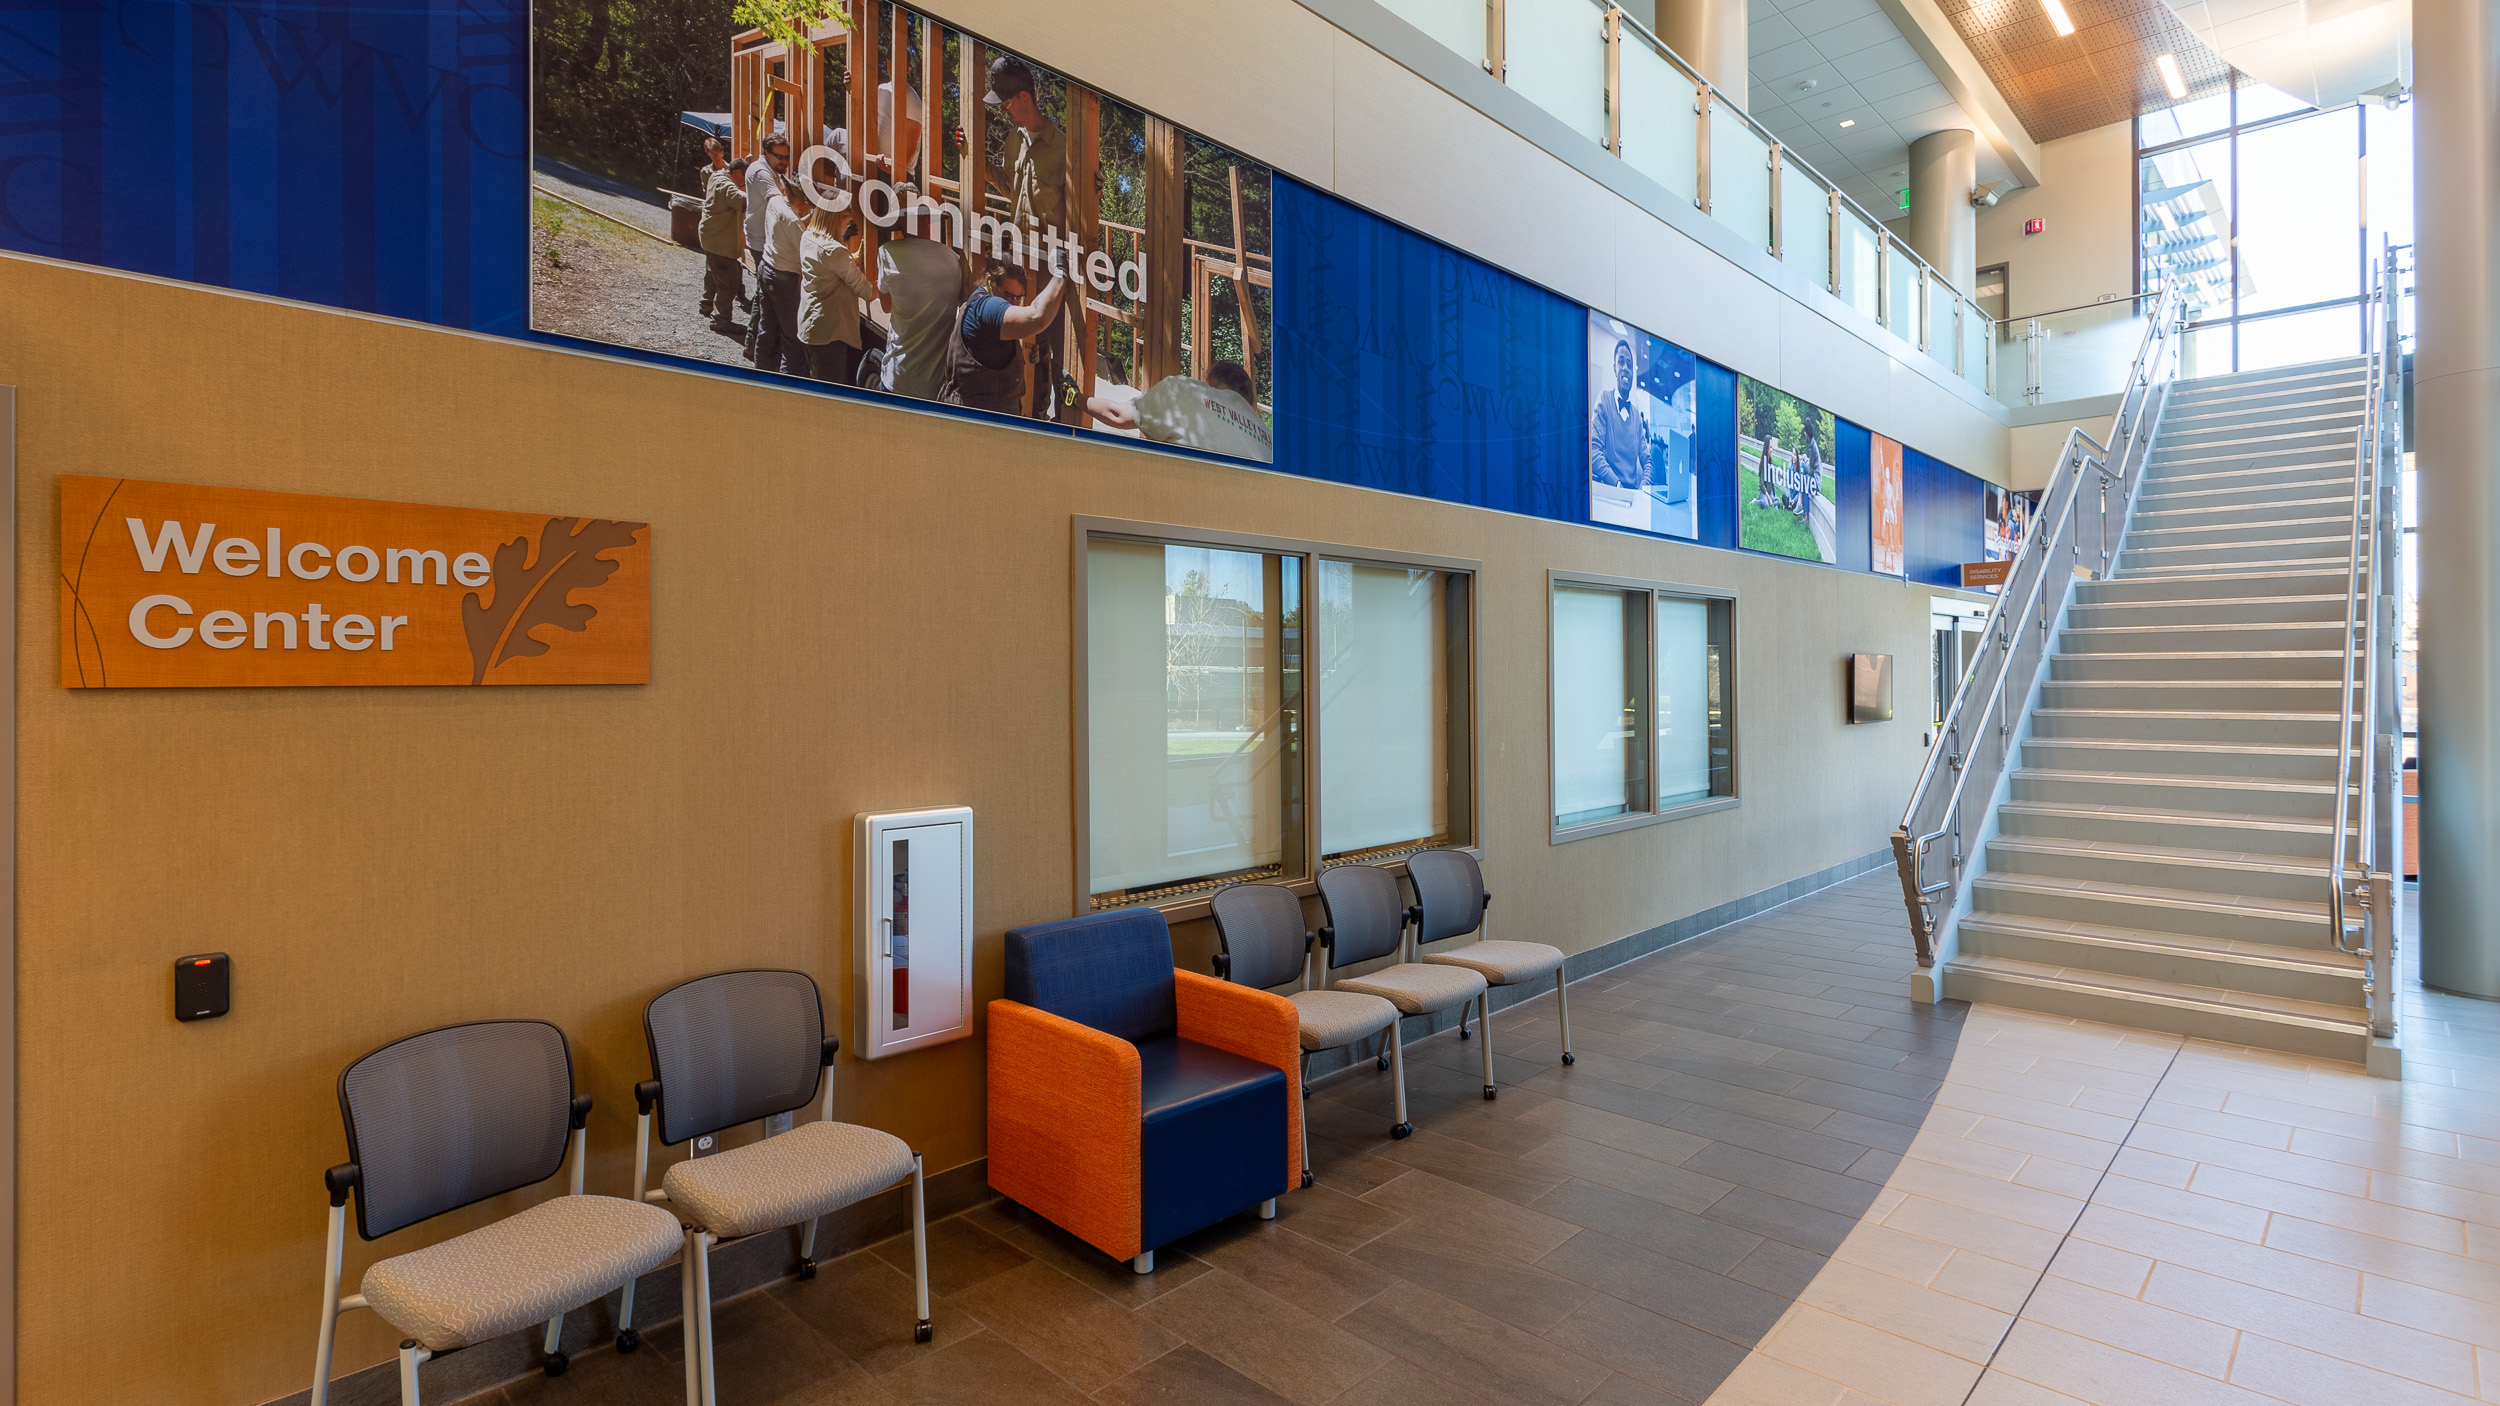 West Valley College Welcome Center Facility Branding